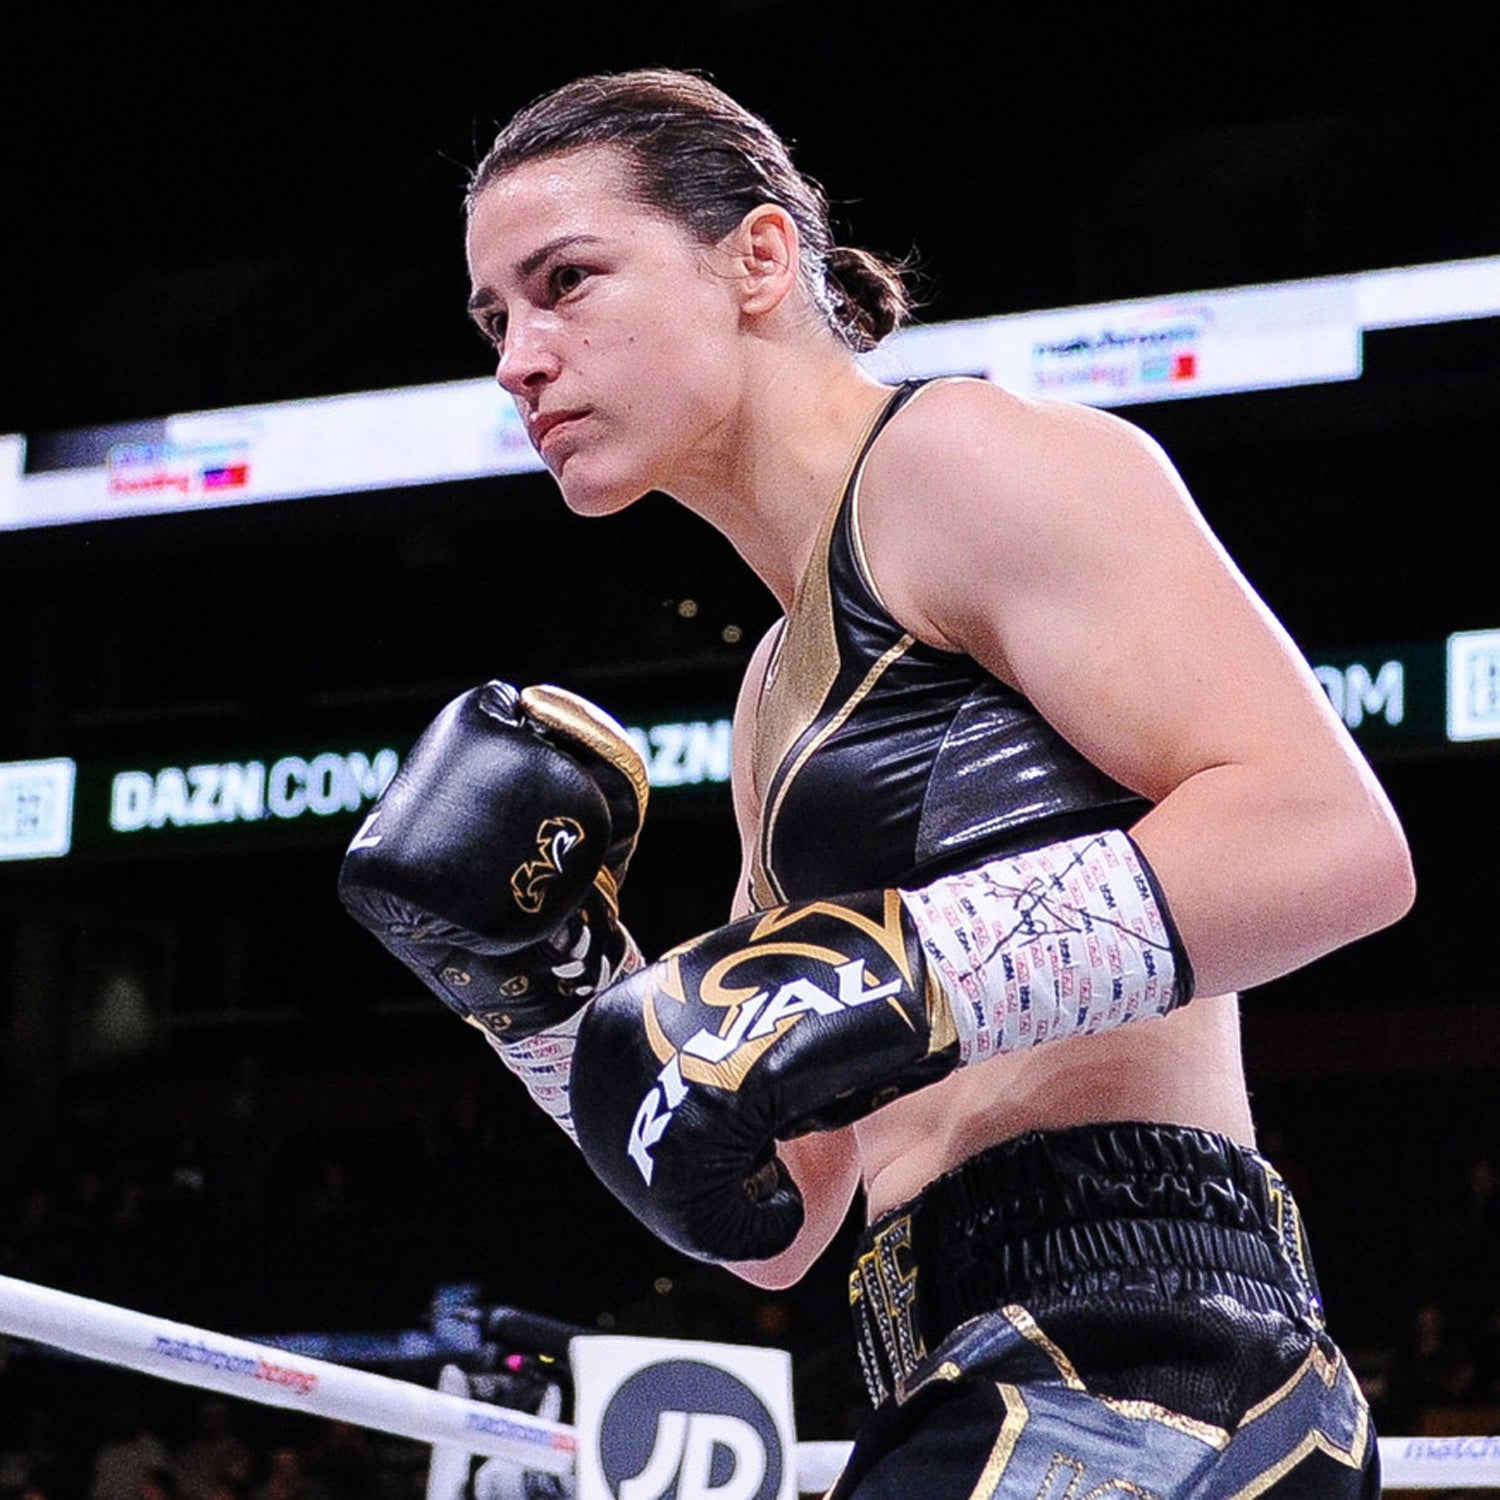 Simple & Effective: How Does Katie Taylor Train?